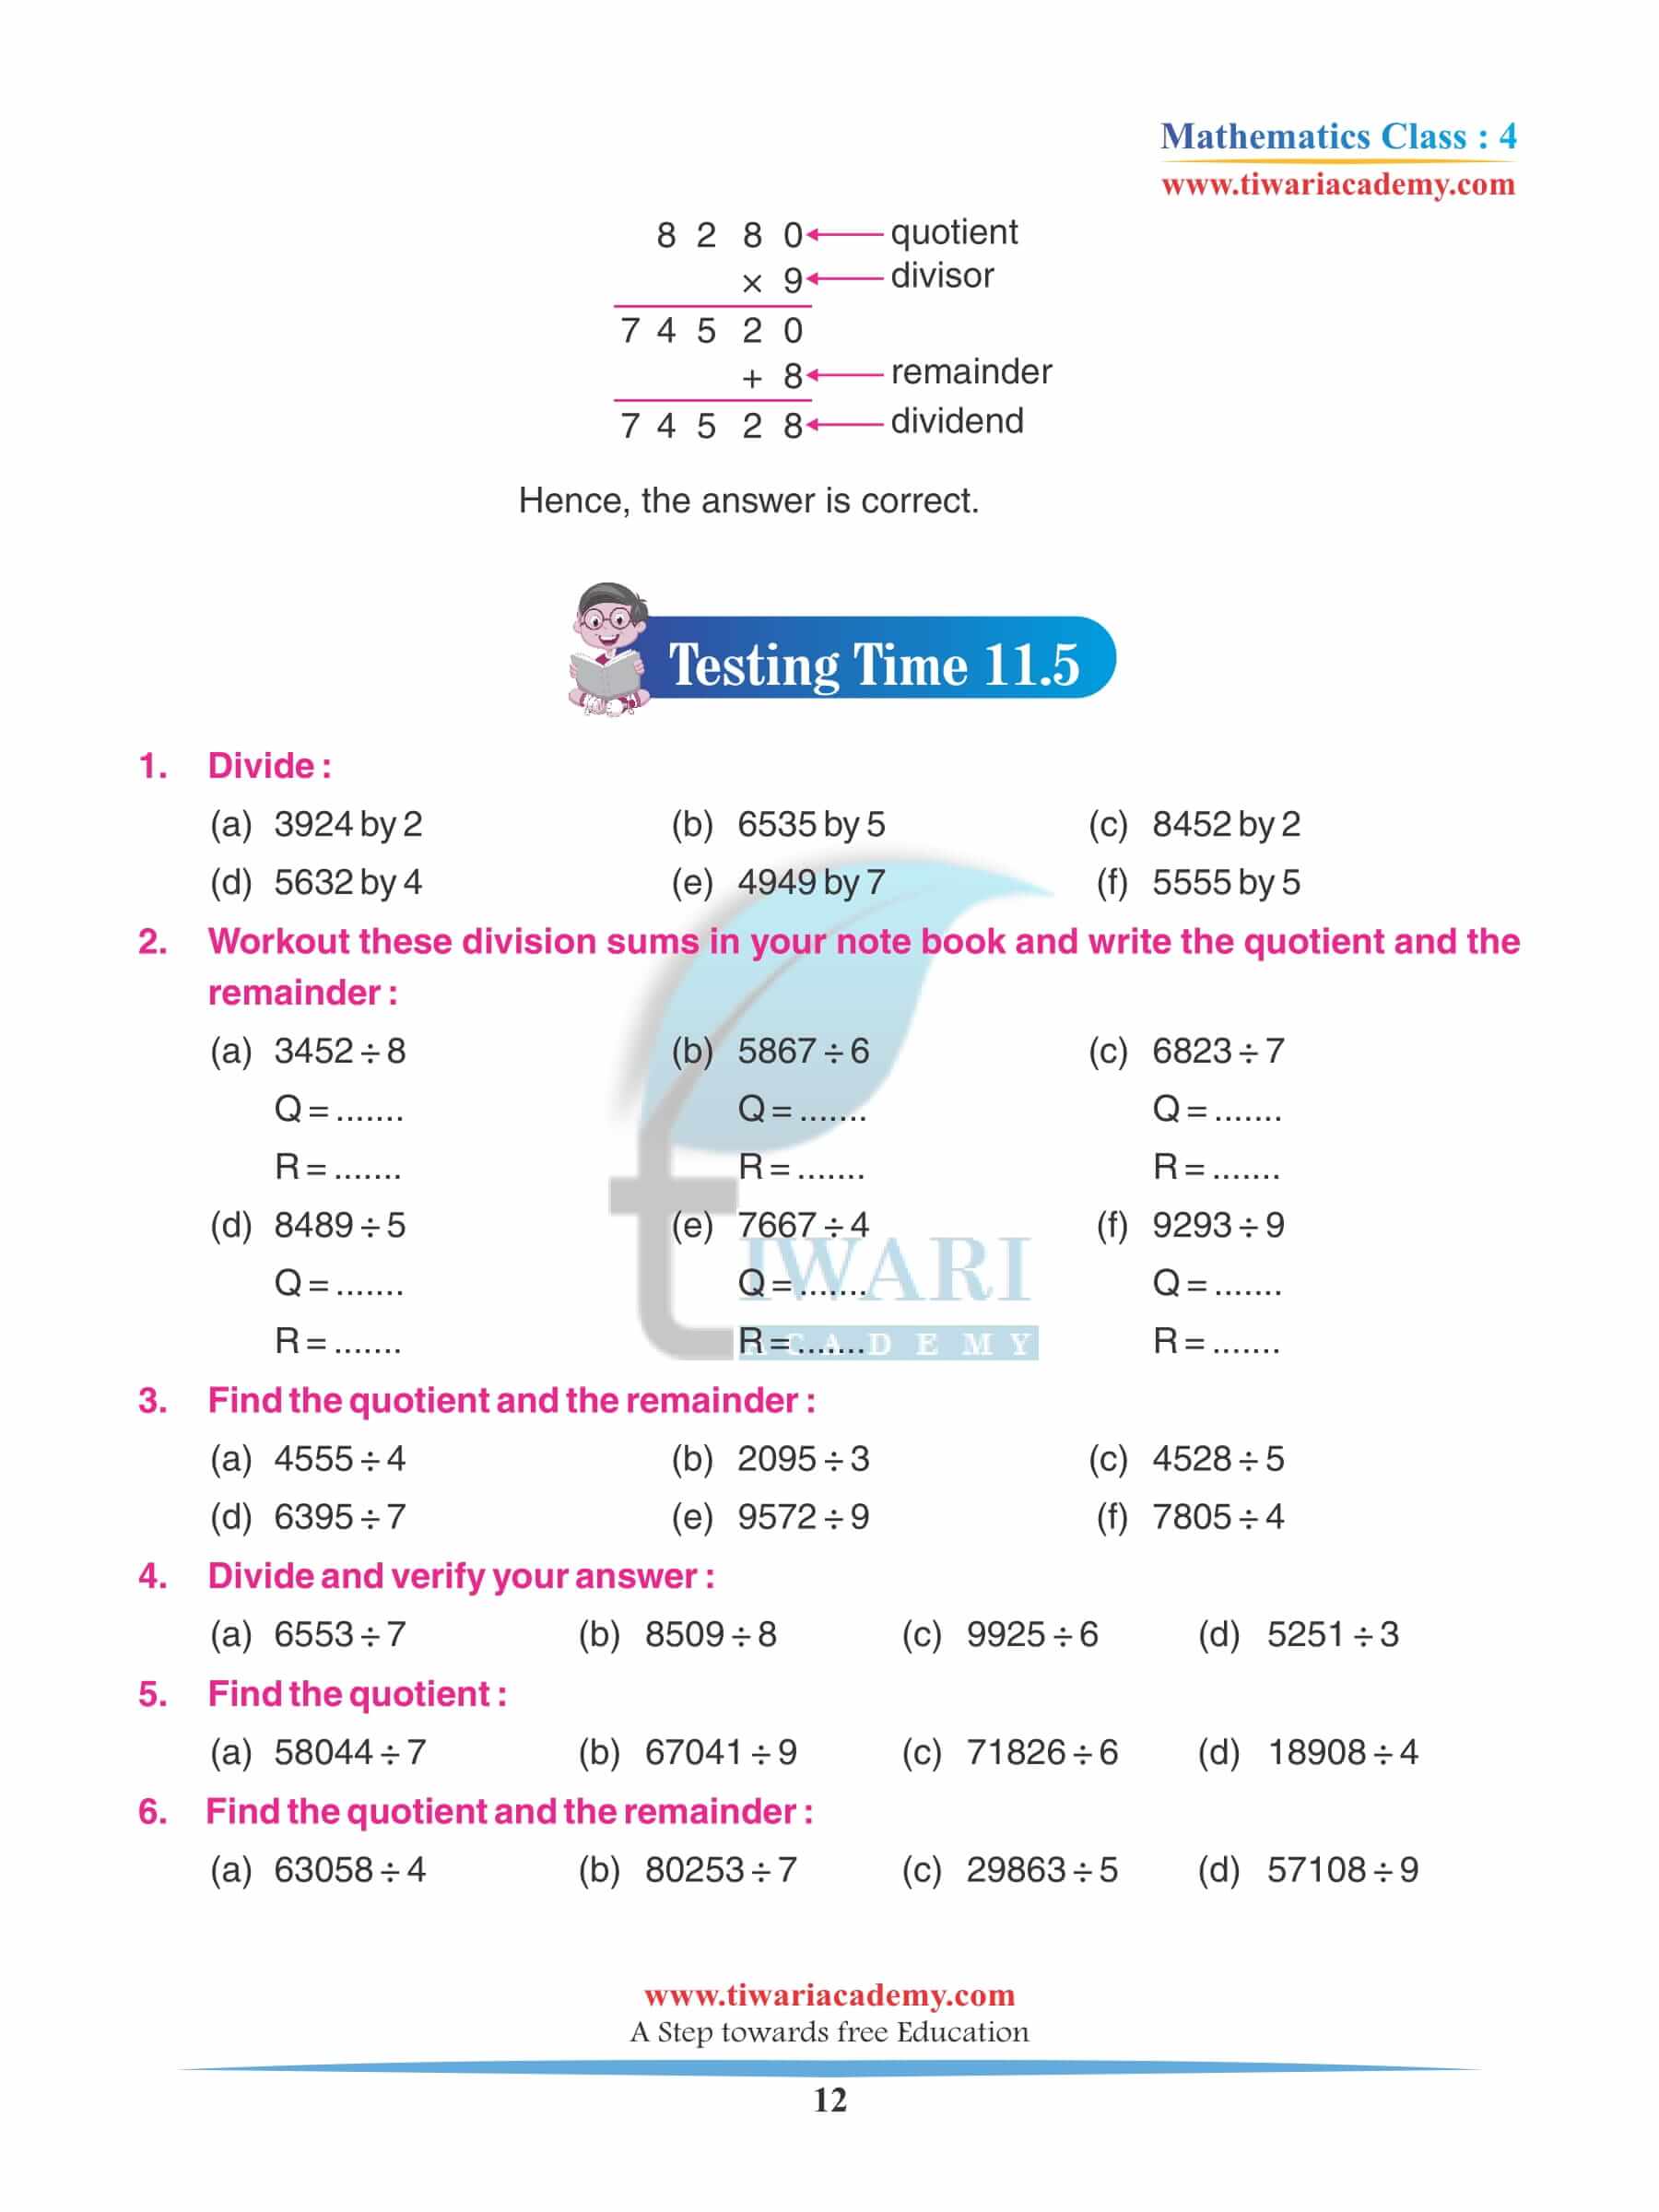 Class 4 Maths Chapter 11 Practice questions answers free